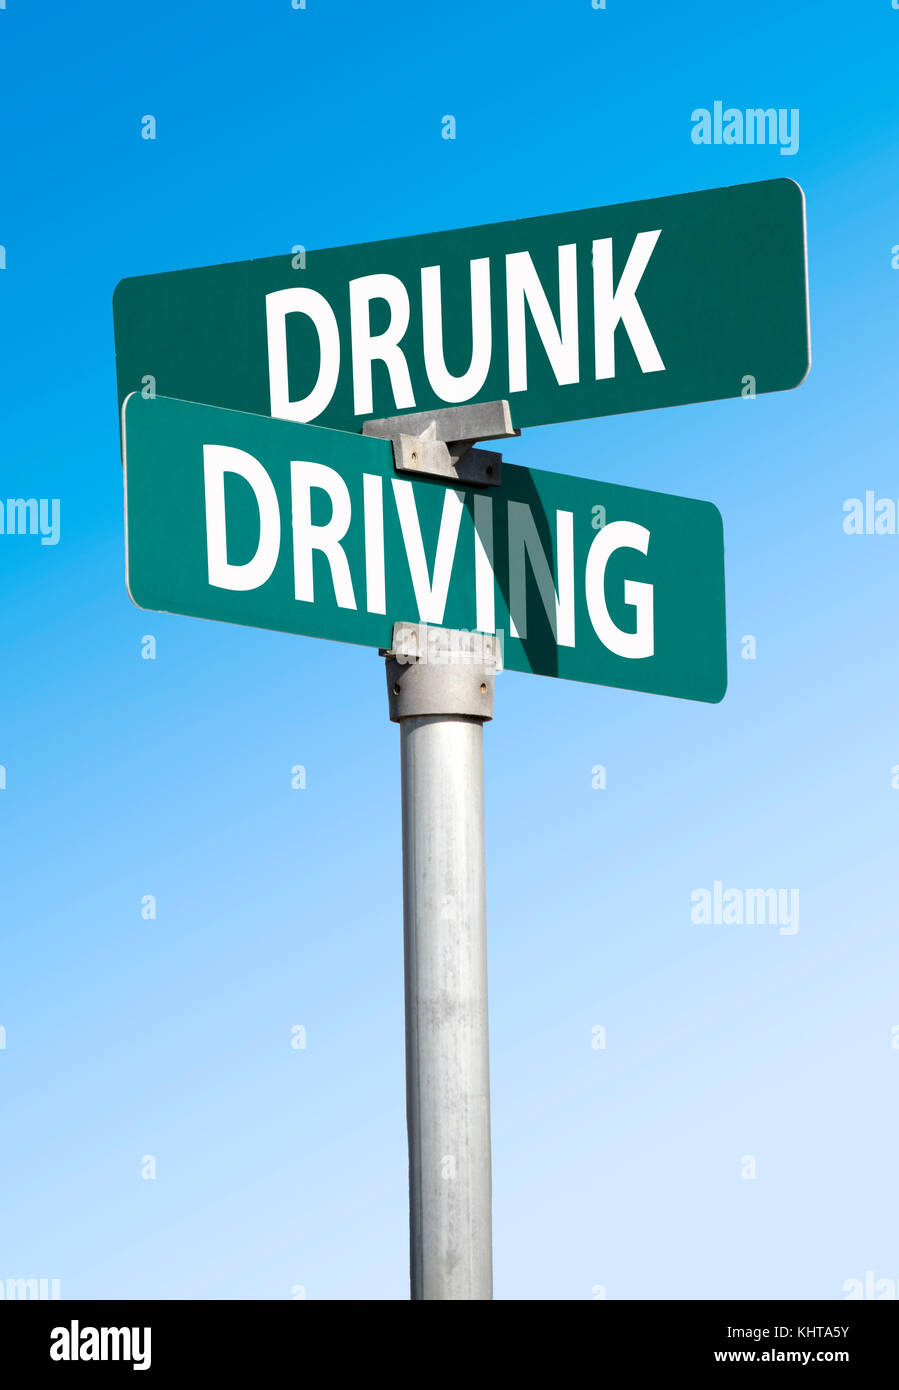 drunk driving concept Stock Photo